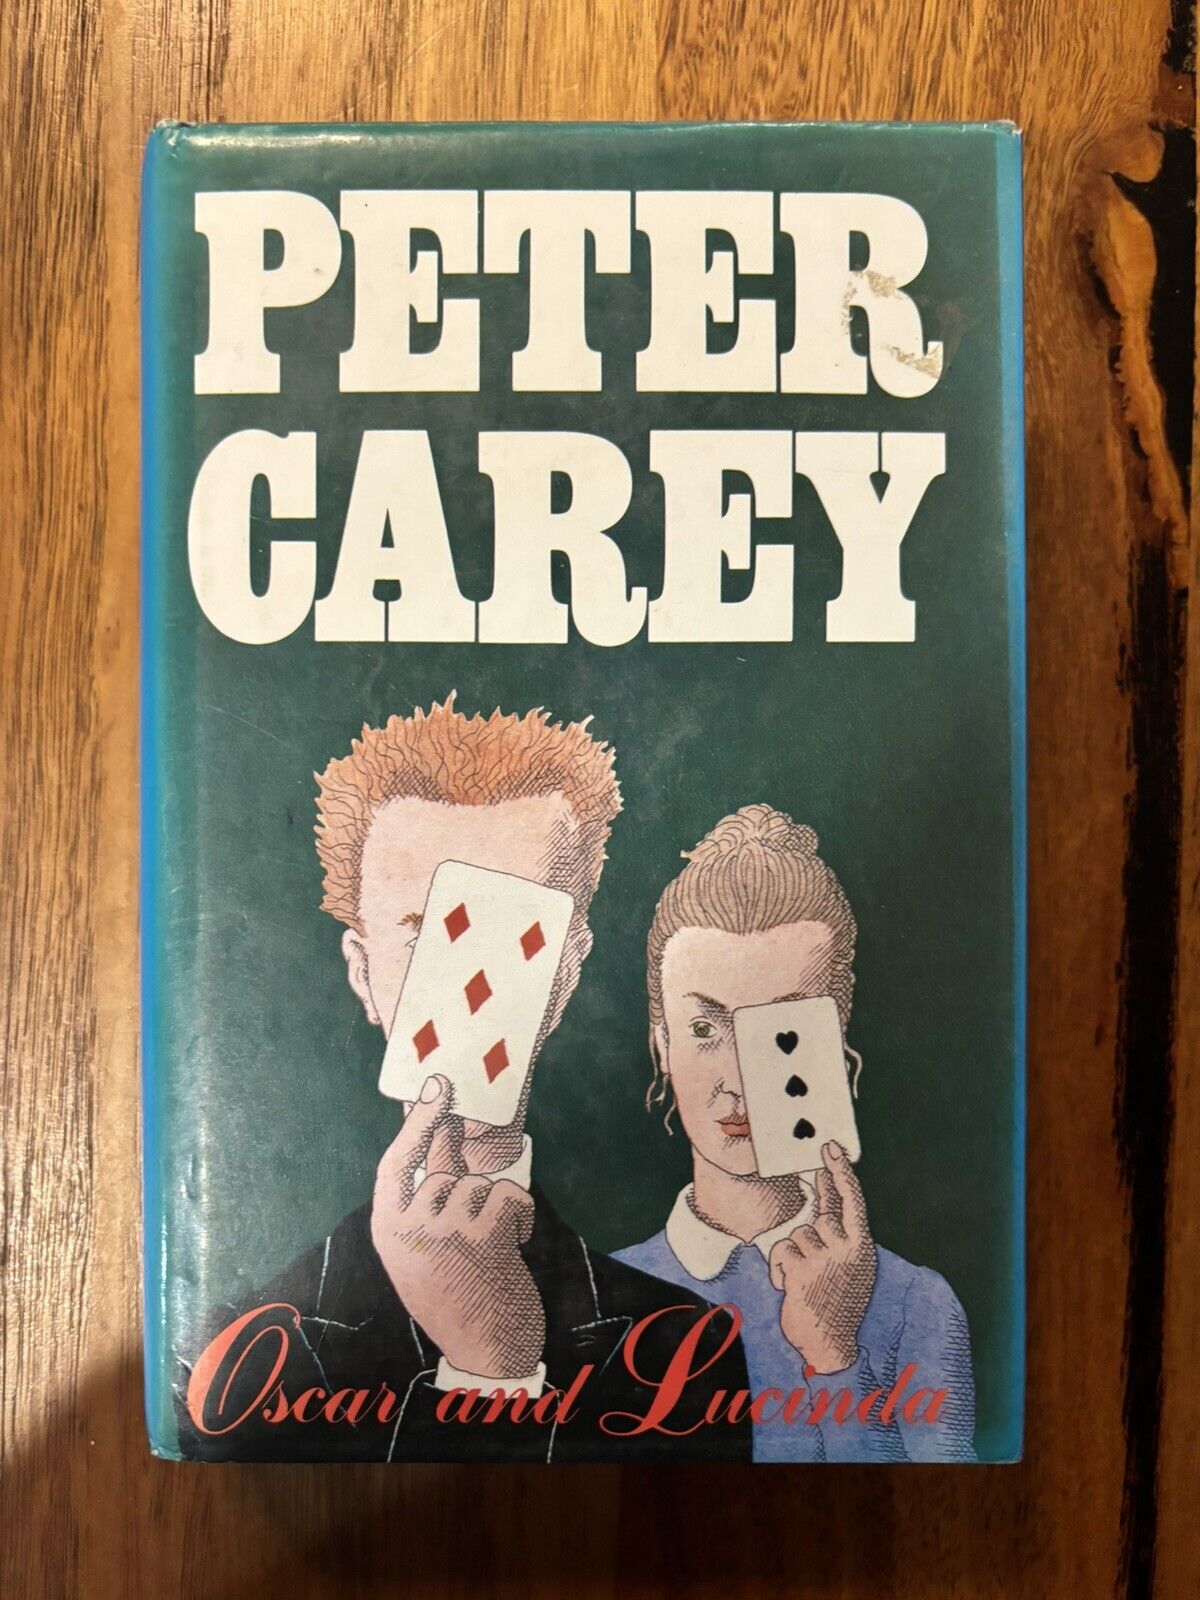 Oscar and Lucinda by Peter Carey Hardcover First Australian Edition Dustjacket